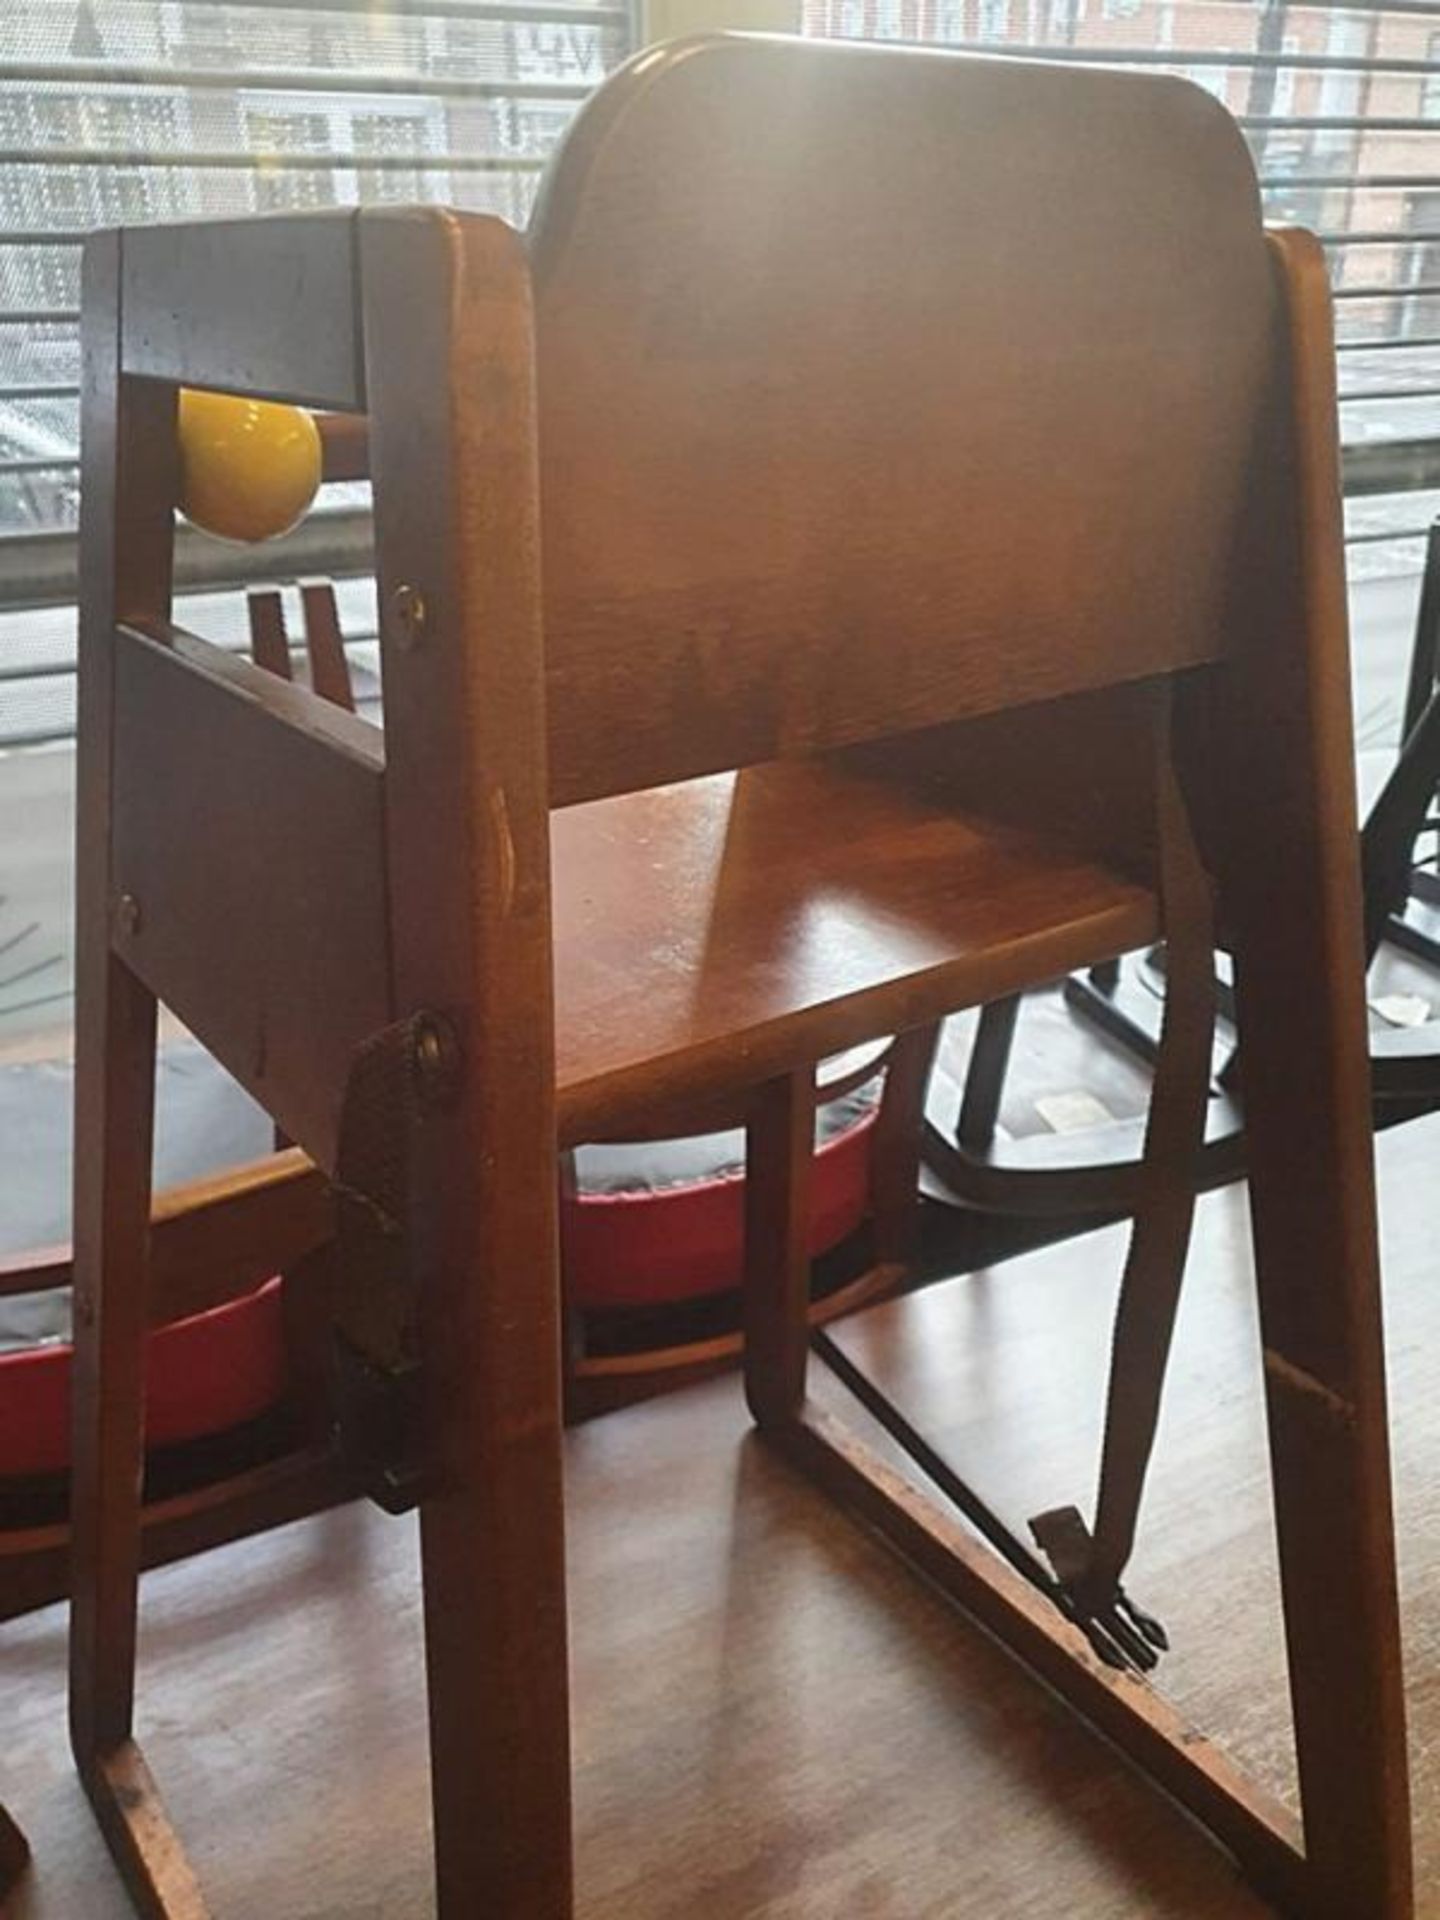 A Pair Of Wooden Commercial High Chairs - Recently Taken From A Contemporary Caribbean Restaurant & - Image 5 of 5